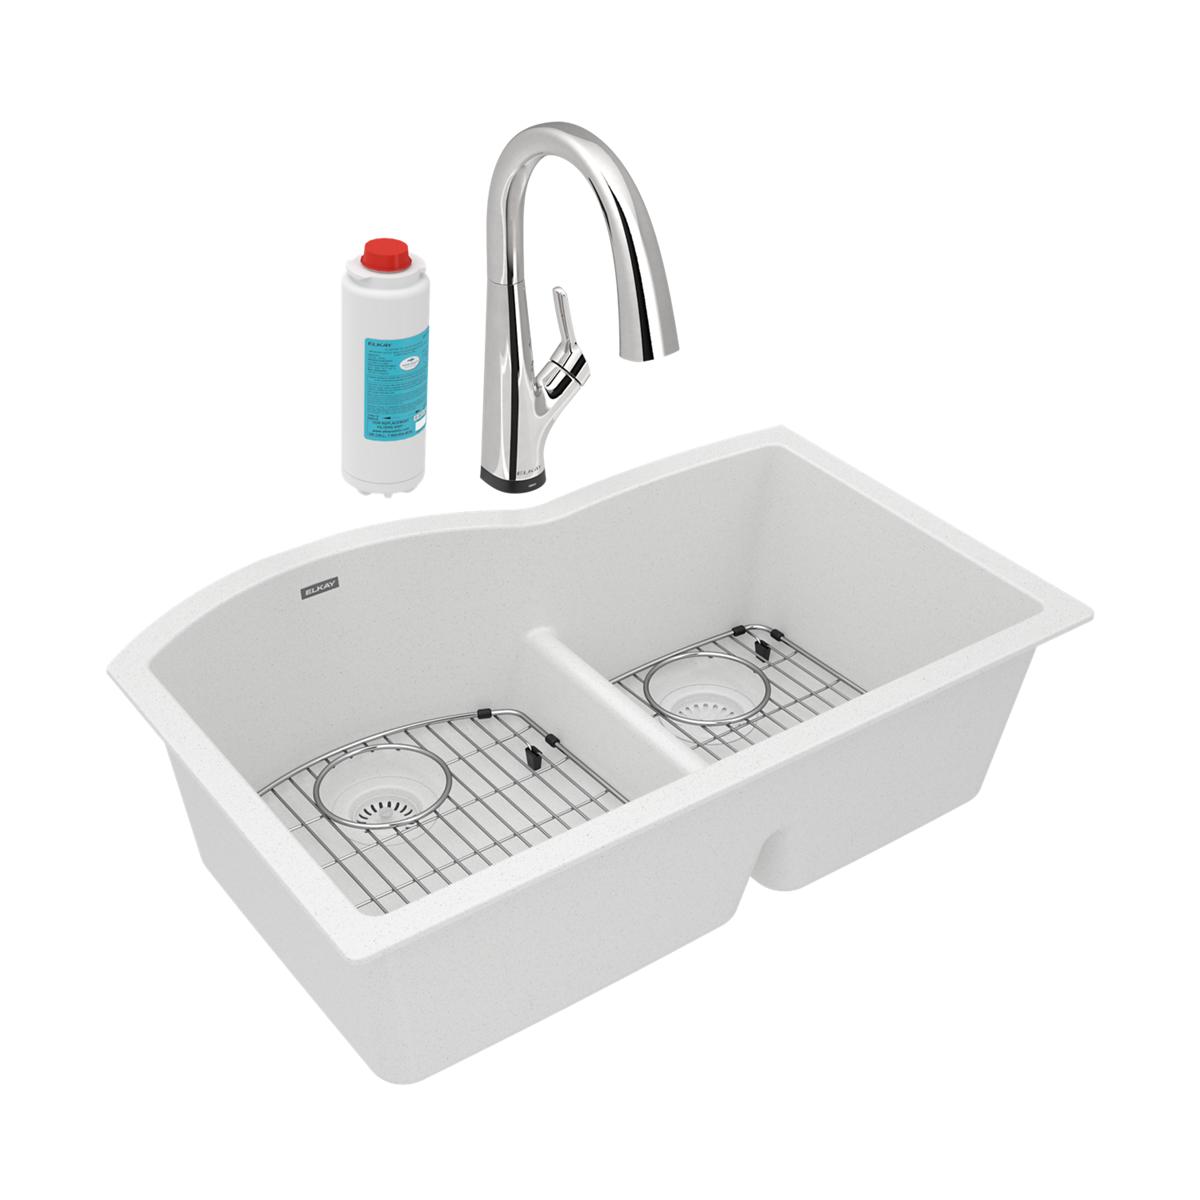 Elkay Quartz Classic 33" x 22" x 10" Offset 60/40 Double Bowl Undermount Sink Kit with Filtered Faucet with Aqua Divide